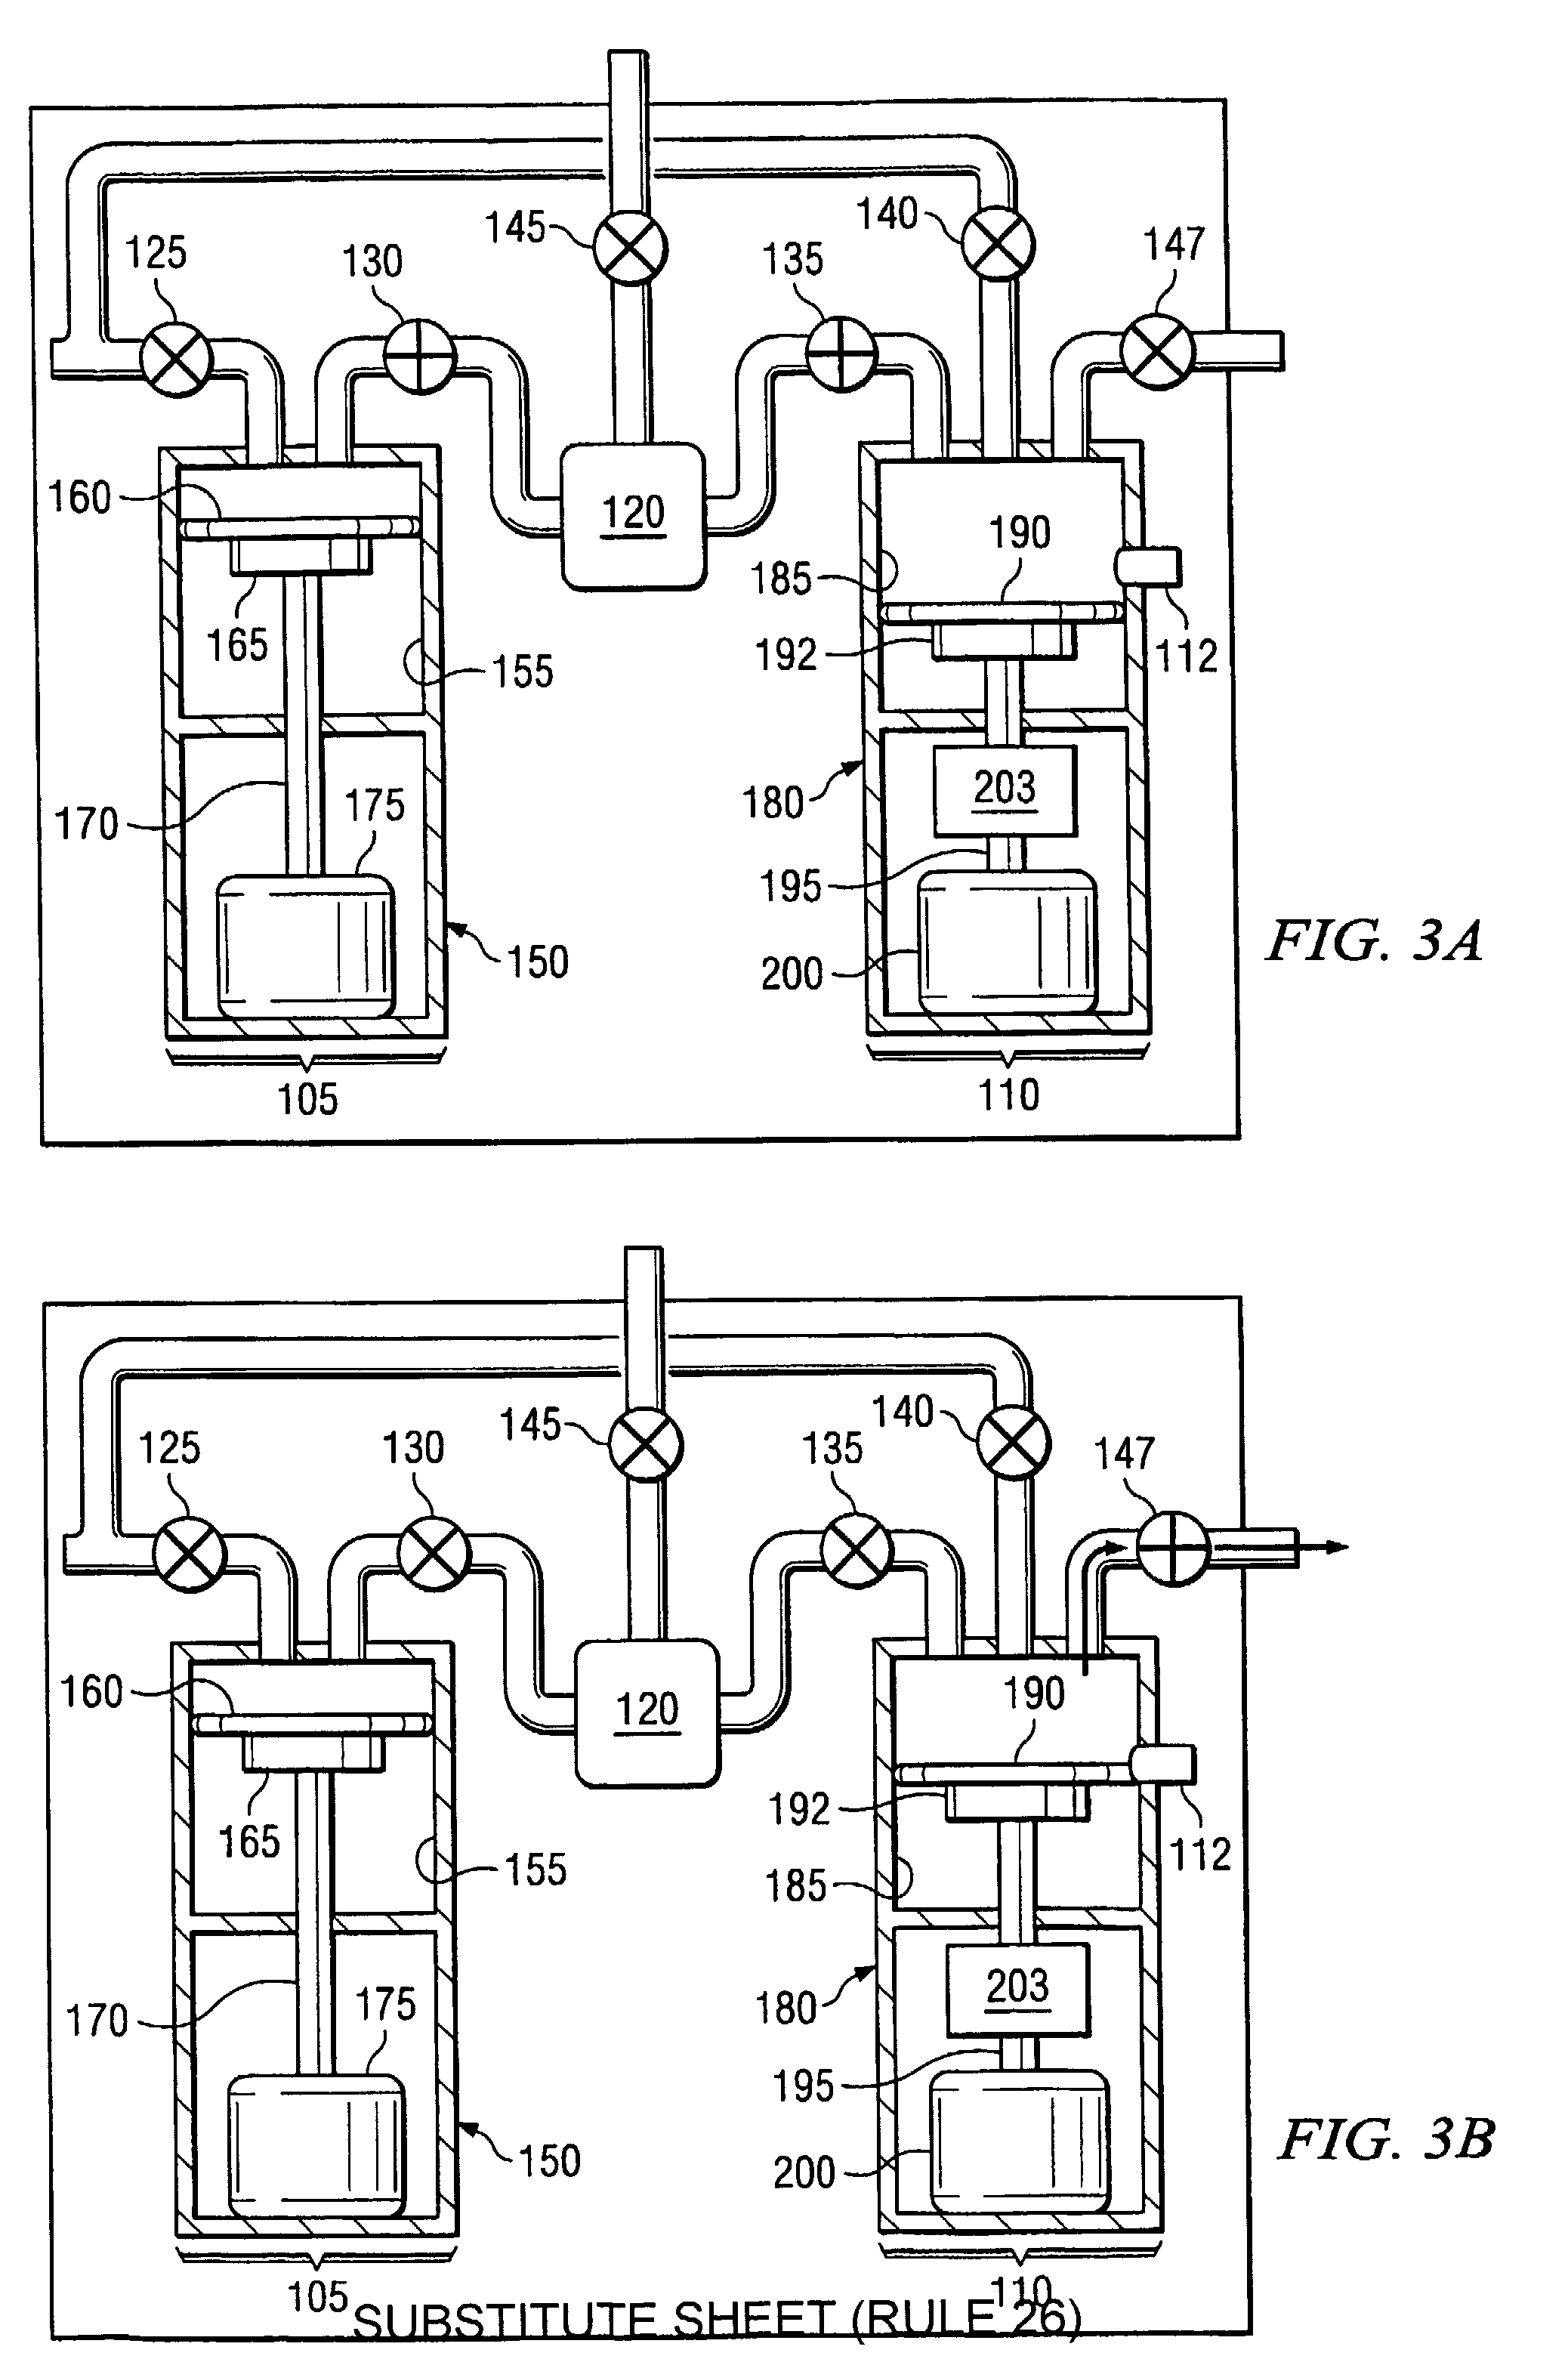 System and Method for a Variable Home Position Dispense System